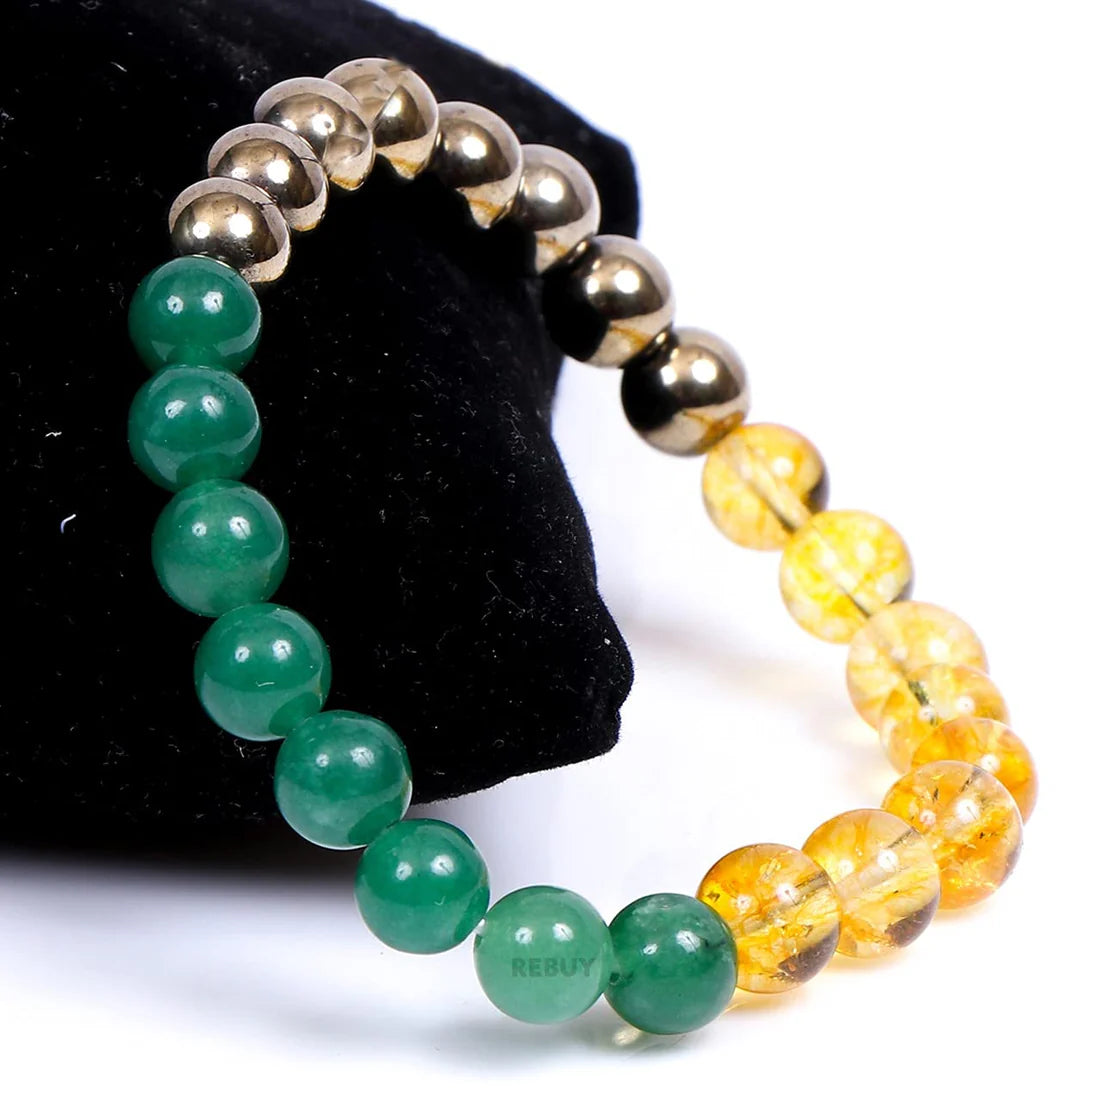 Green Jade, Citrine, and Pyrite Stone Bracelet: Manifest Wealth With This Winning Combination